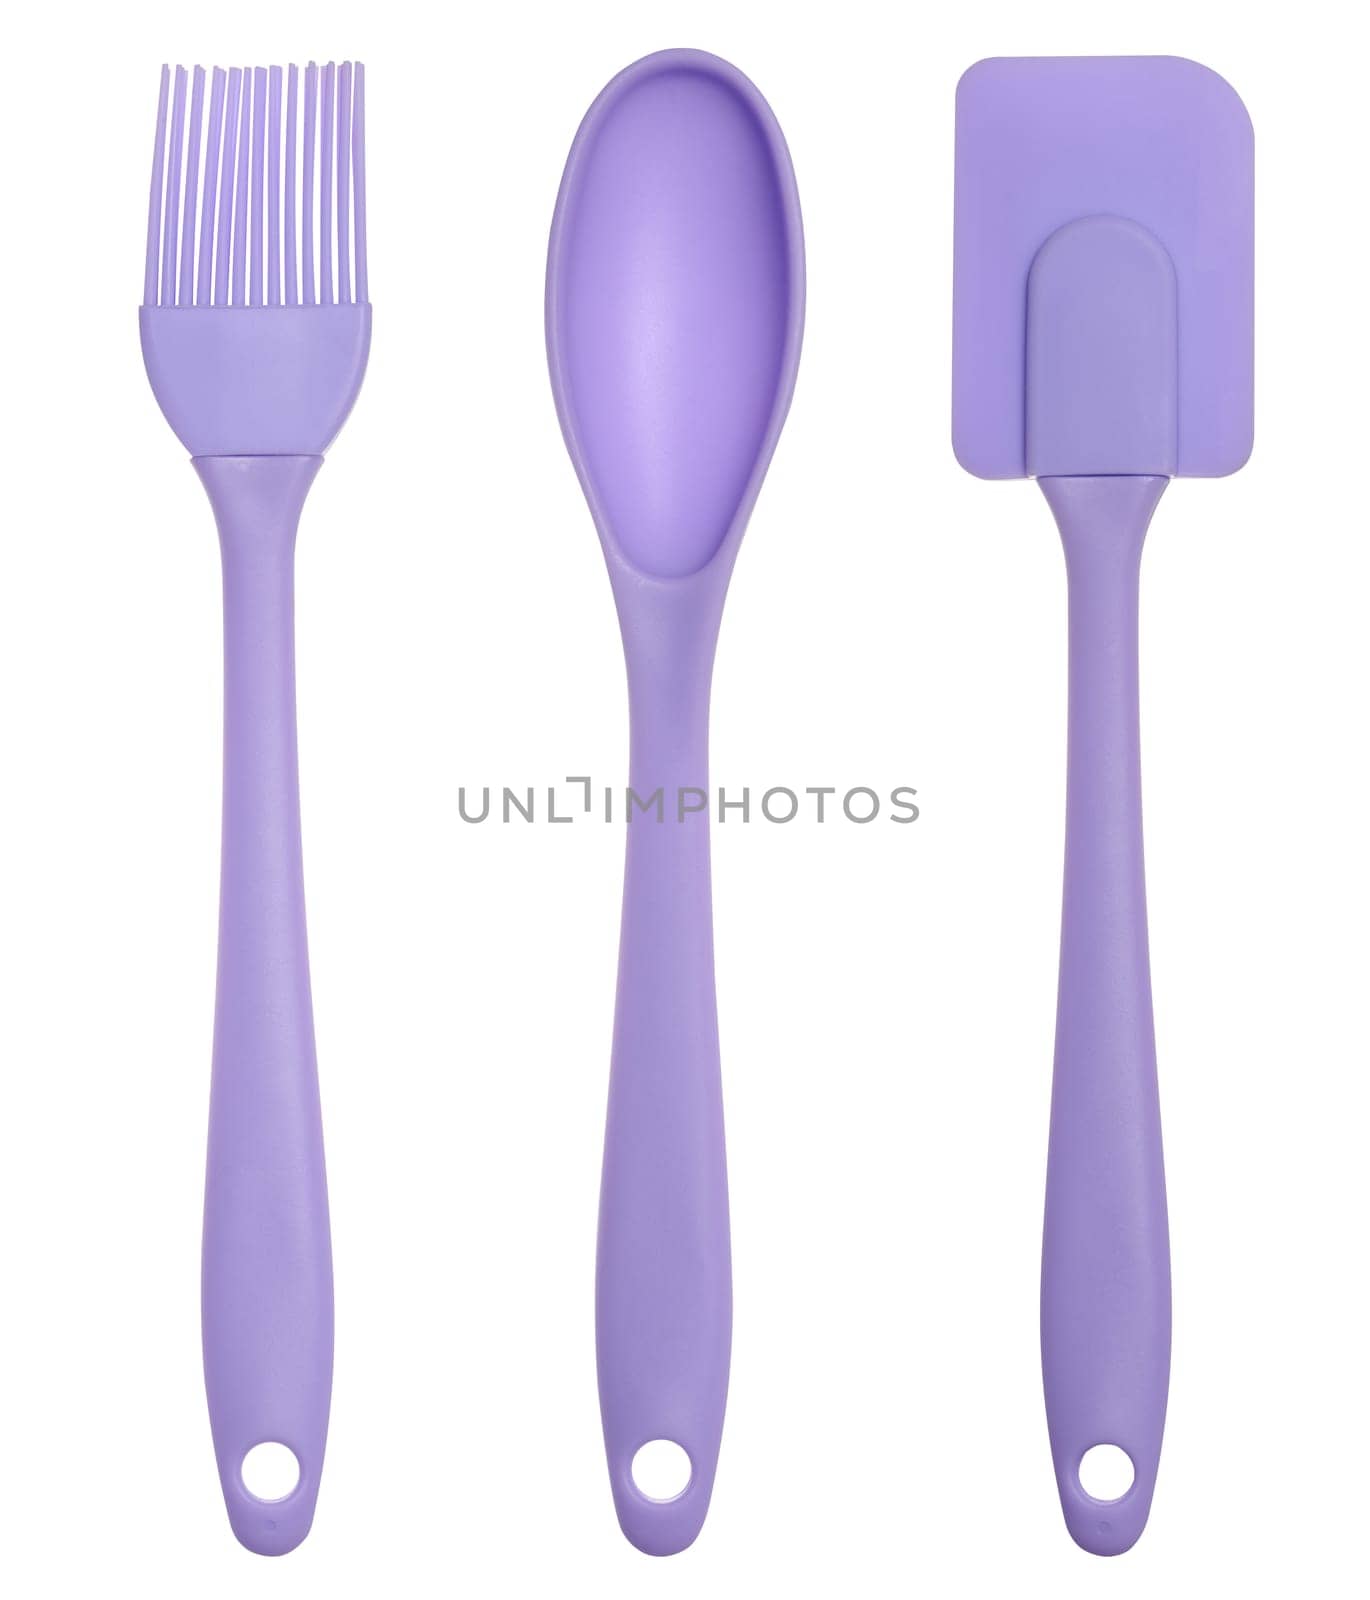 Silicone spoon, spatula and brush for eating on isolated background